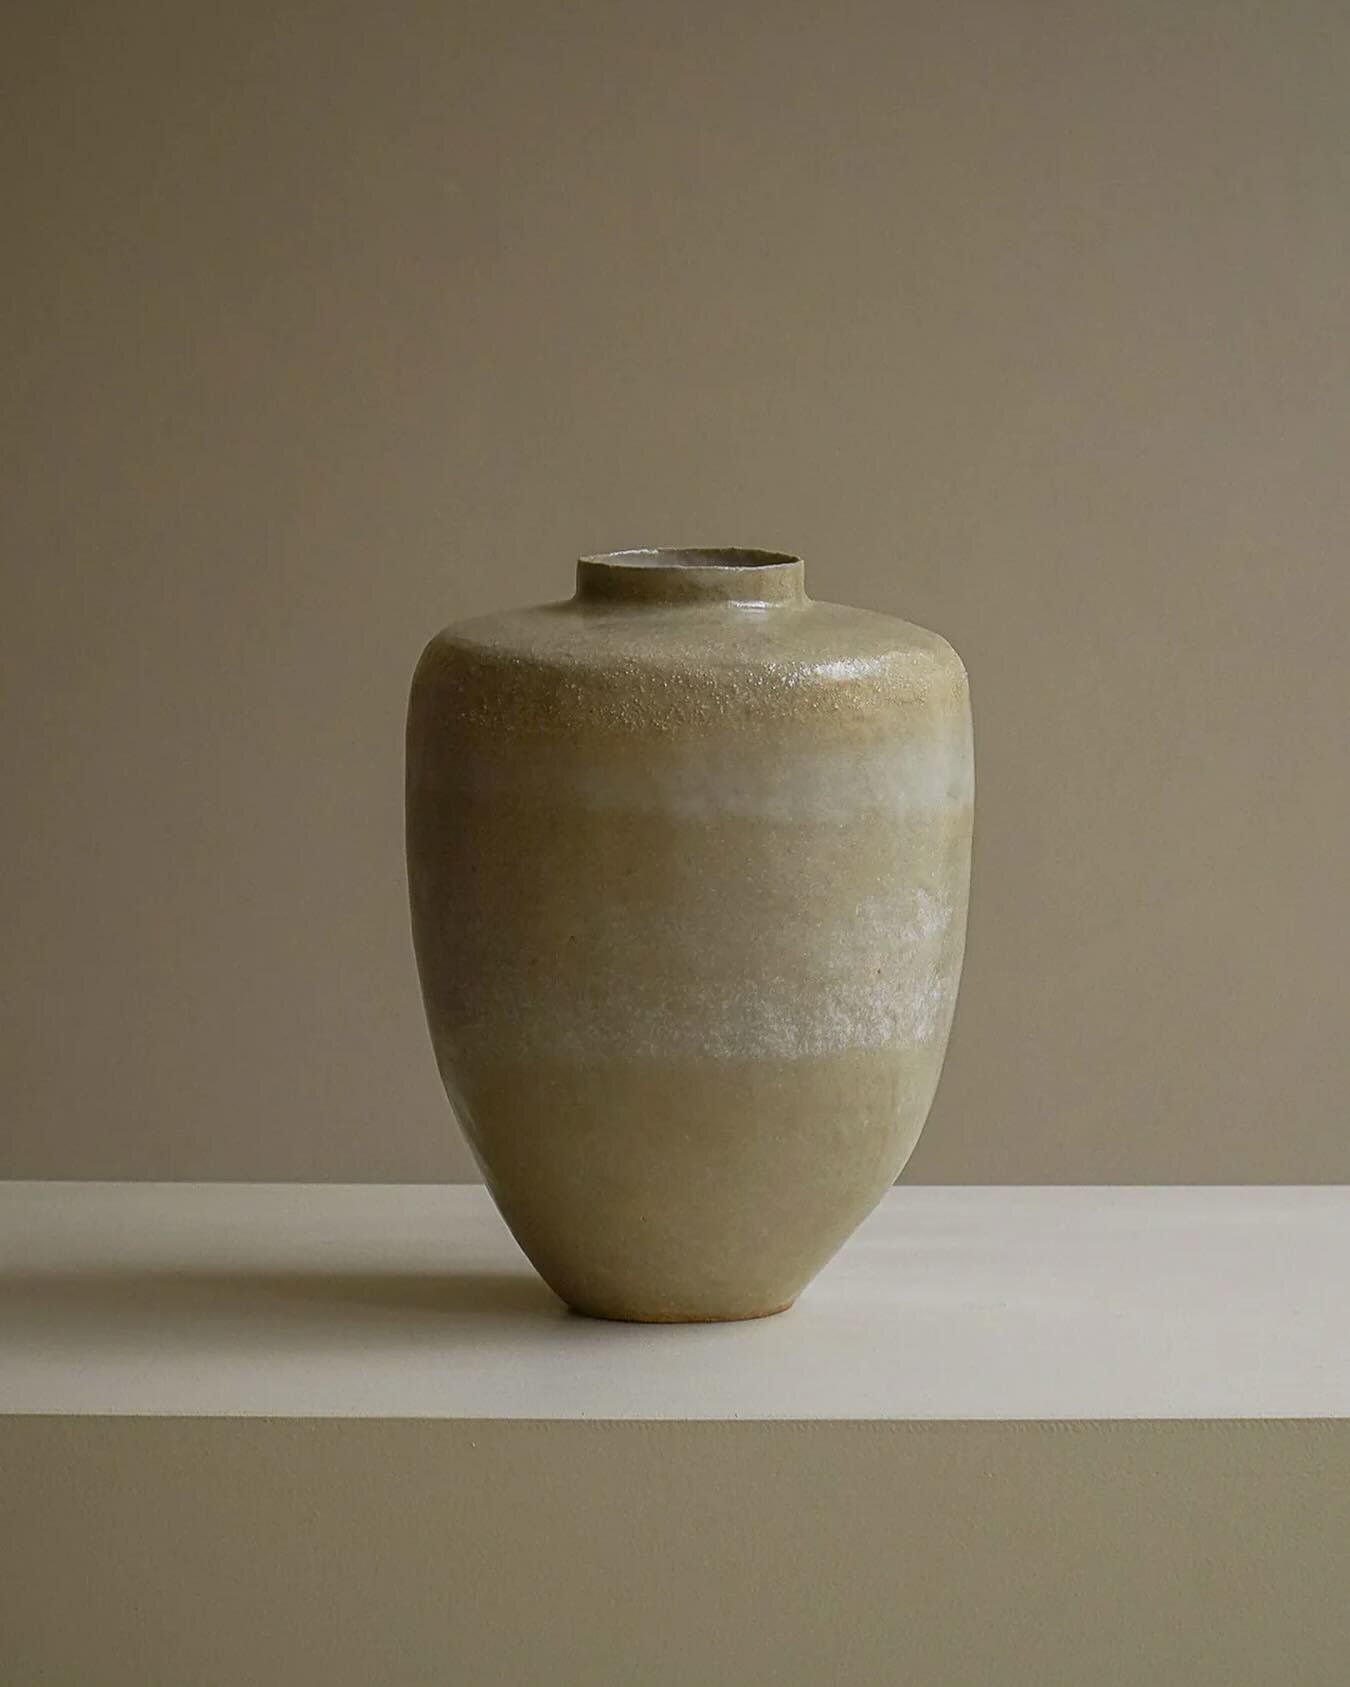 Pinch and coiled vessel in ochre stoneware with washy satin glaze and soft markings. H 24.5 x D 18cm  @lalune.galerie 

📷 @lalune.galerie